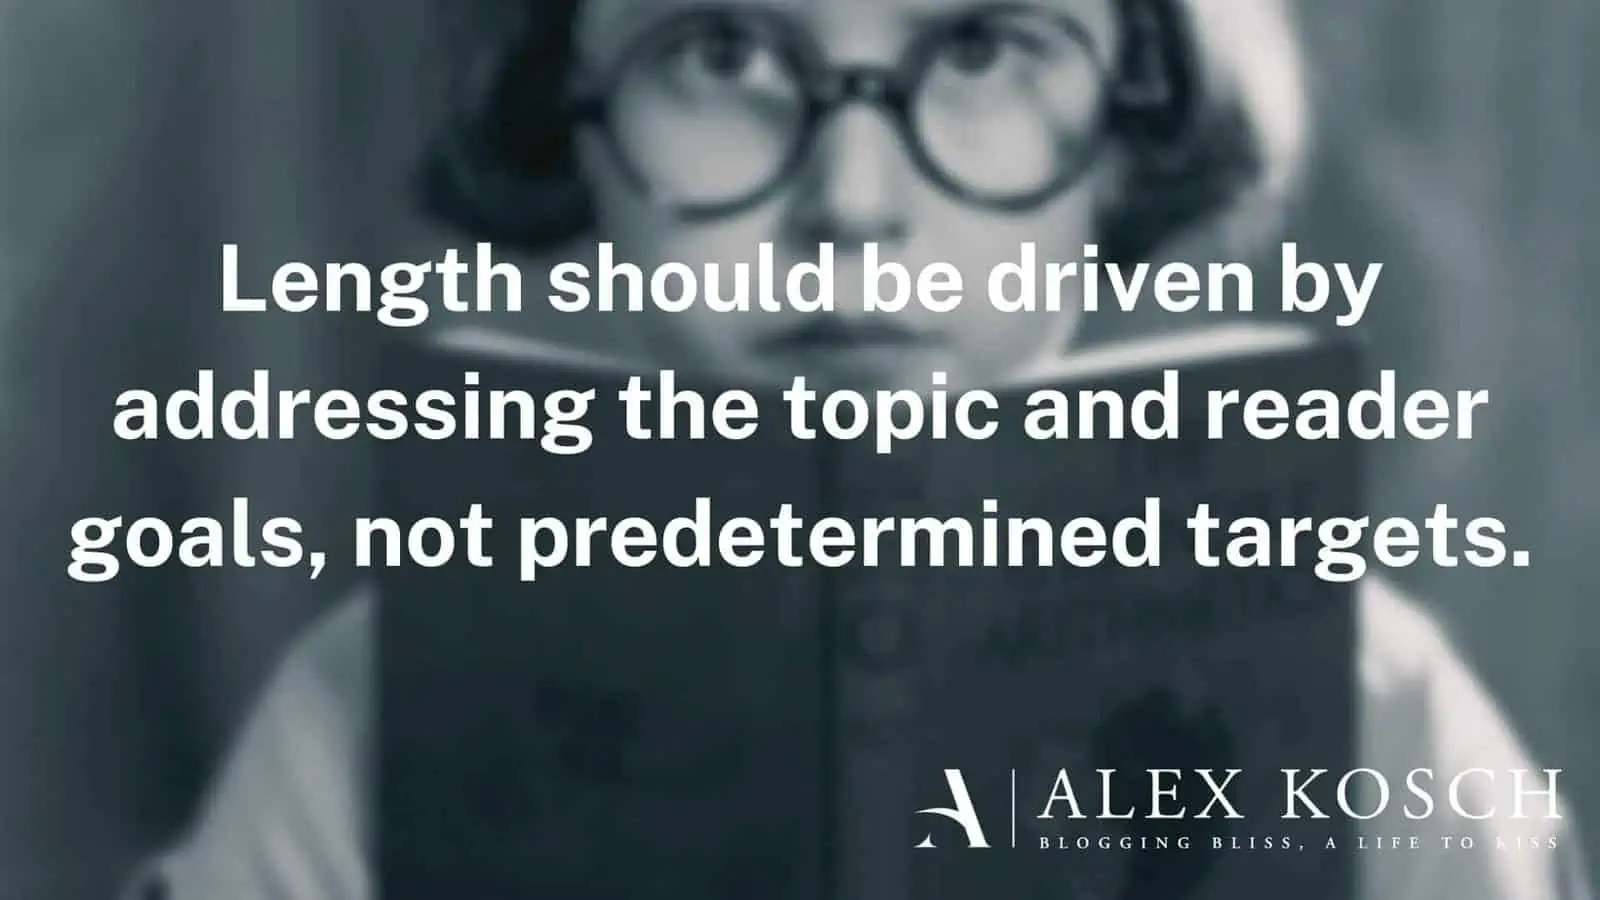 Length should be driven by addressing the topic and reader goals, not predetermined targets.